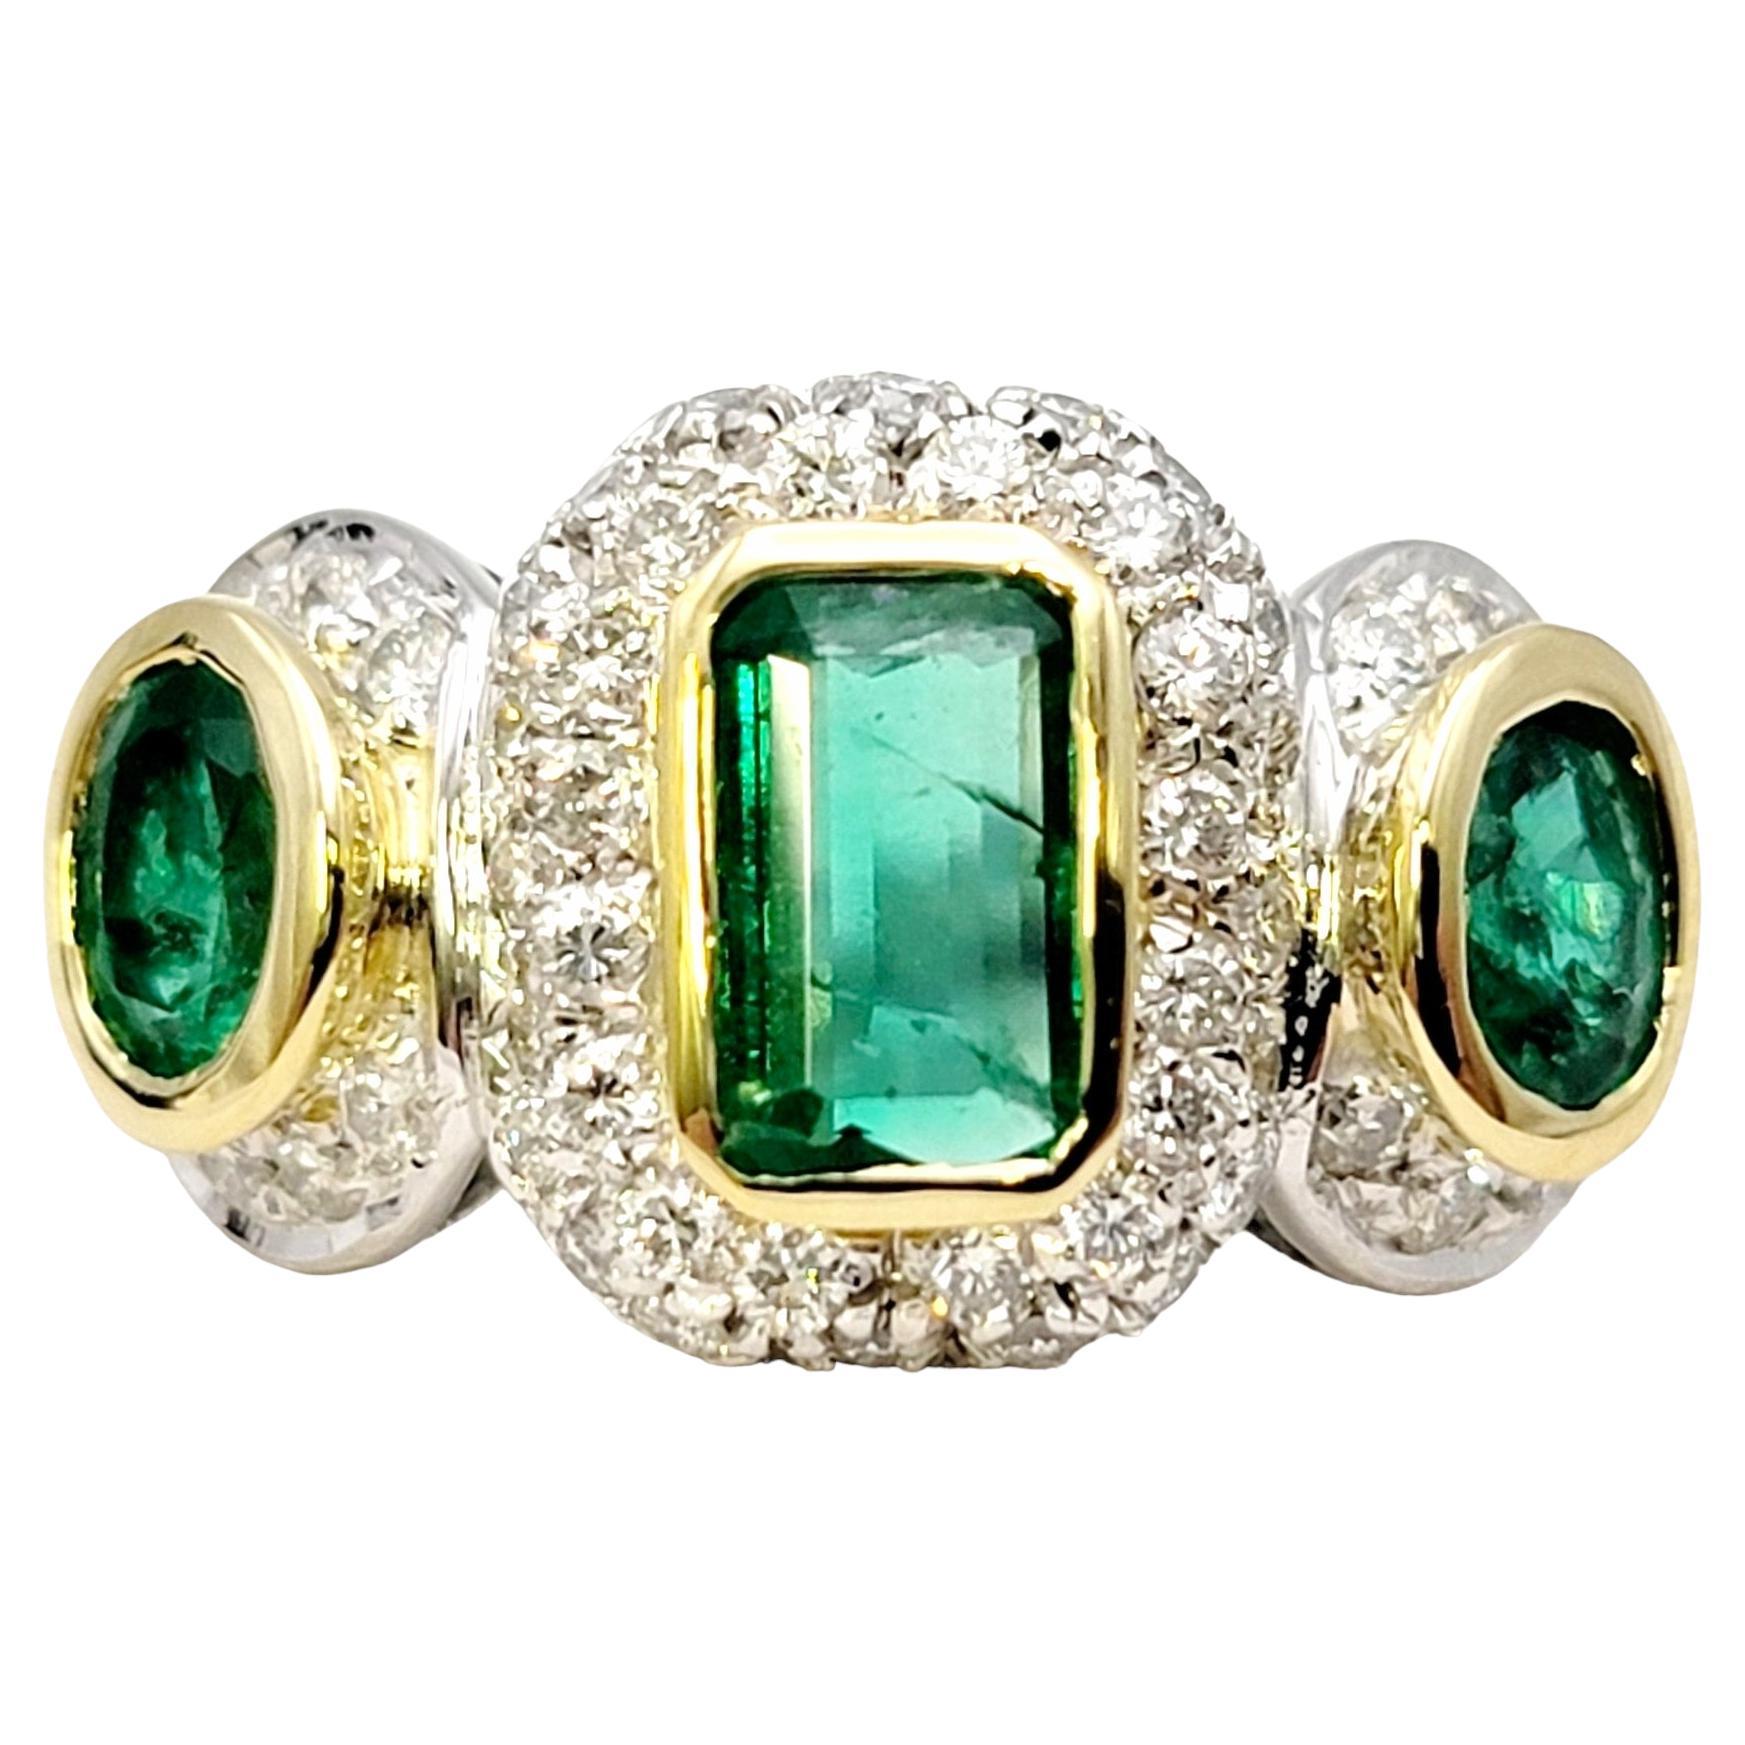 Natural Emerald Three Stone Ring with Pave Diamond Halos in 18 Karat Gold